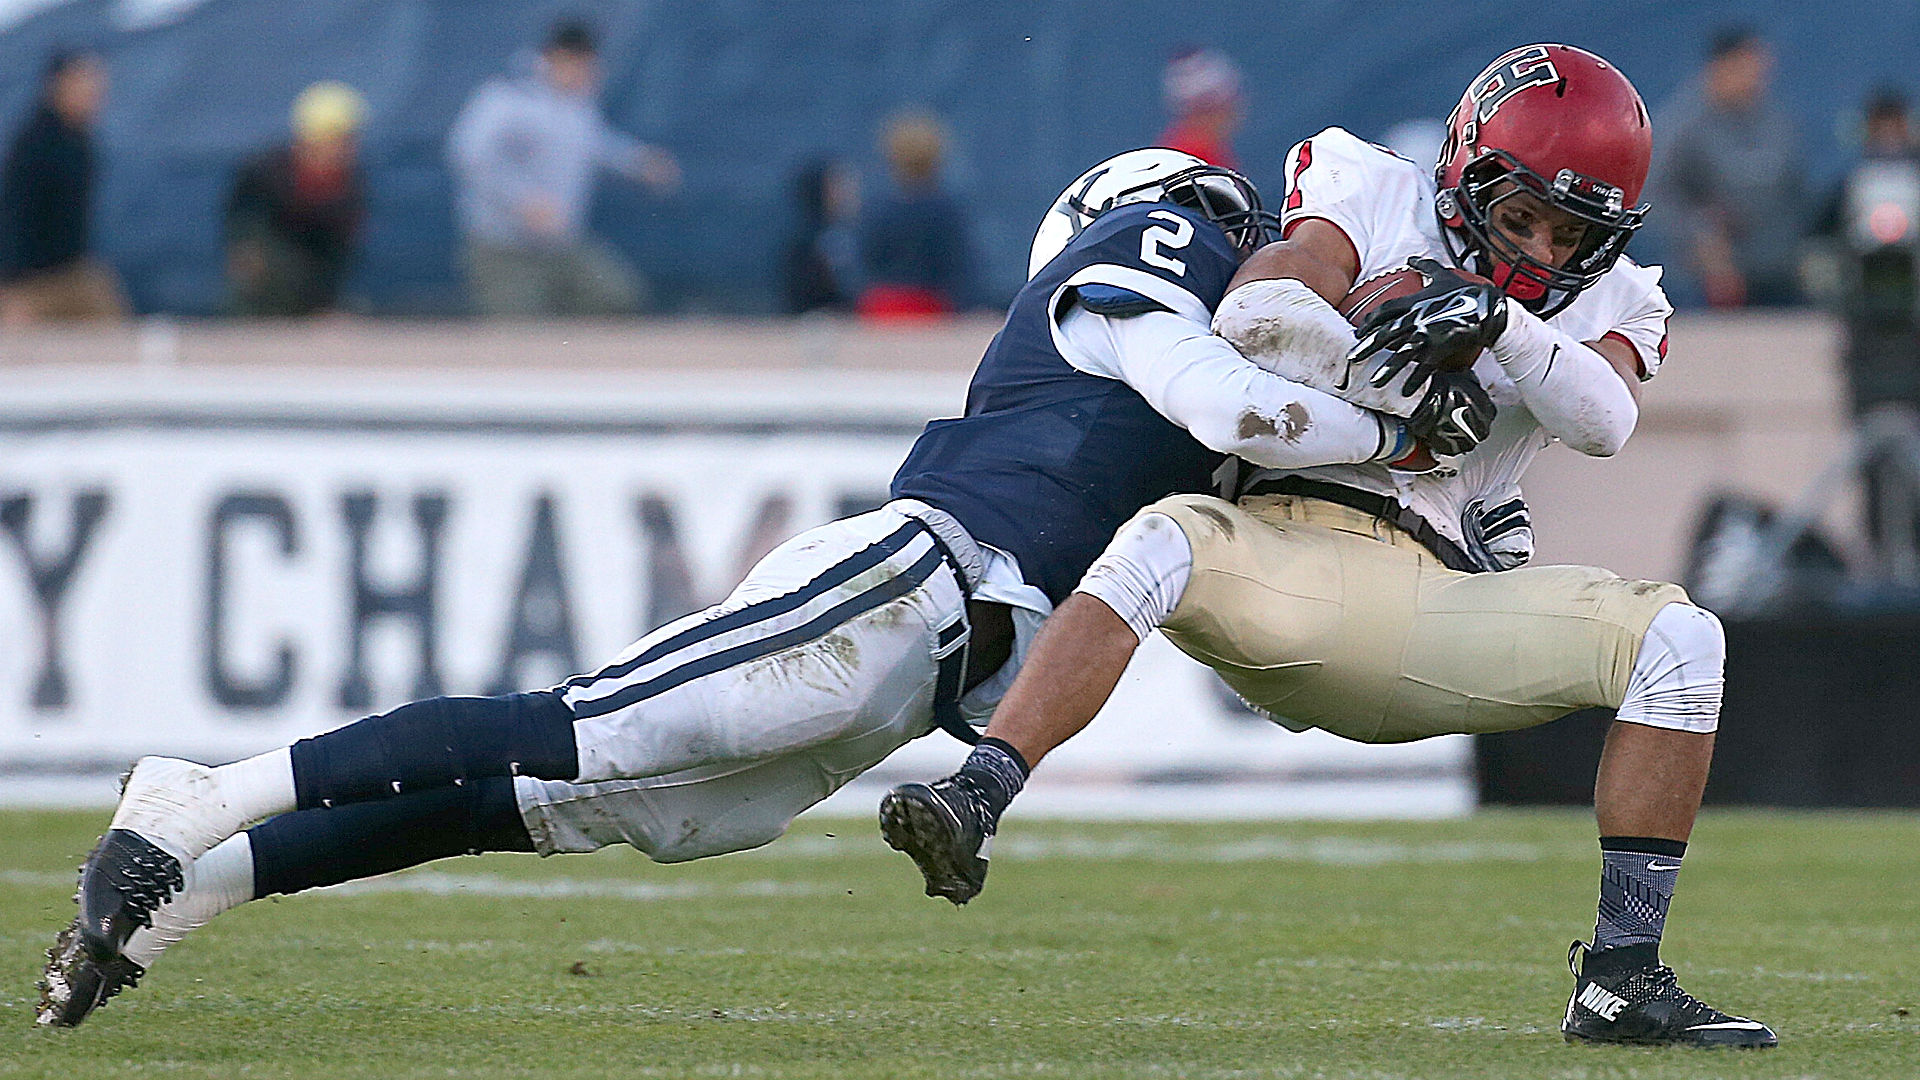 Ivy coaches want to eliminate tackling in practices